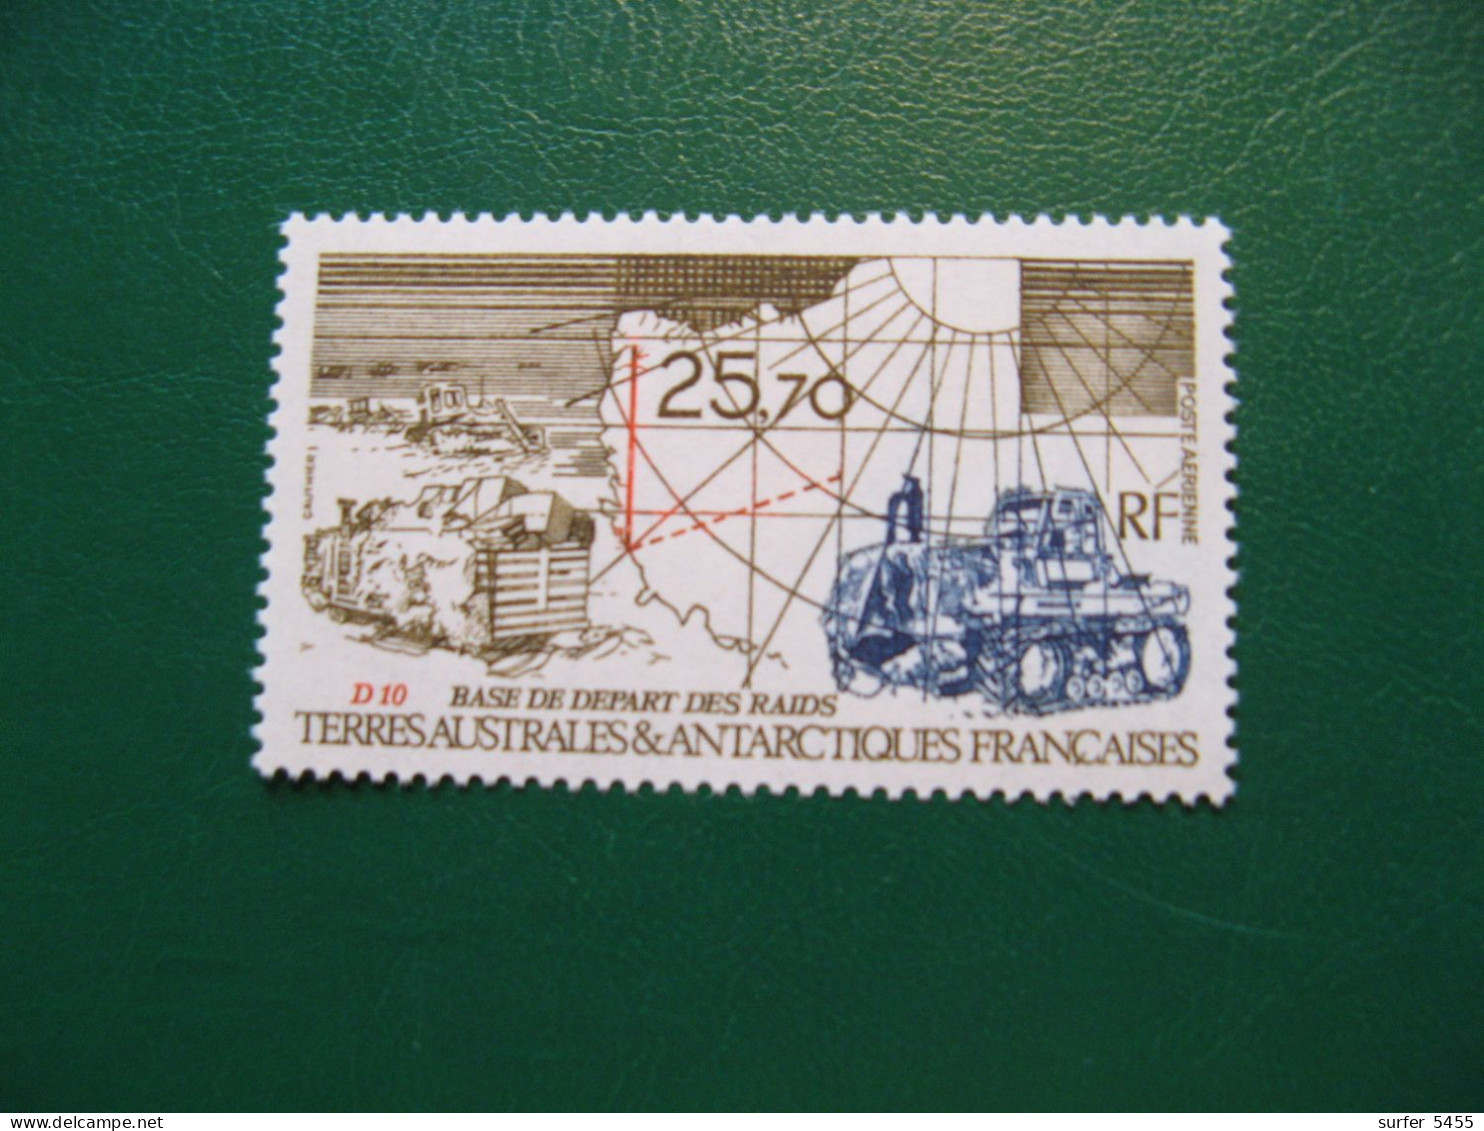 TAAF YVERT POSTE AERIENNE N° 127 - TIMBRE NEUF** LUXE - MNH - SERIE COMPLETE - FACIALE 3,91 EUROS - Neufs